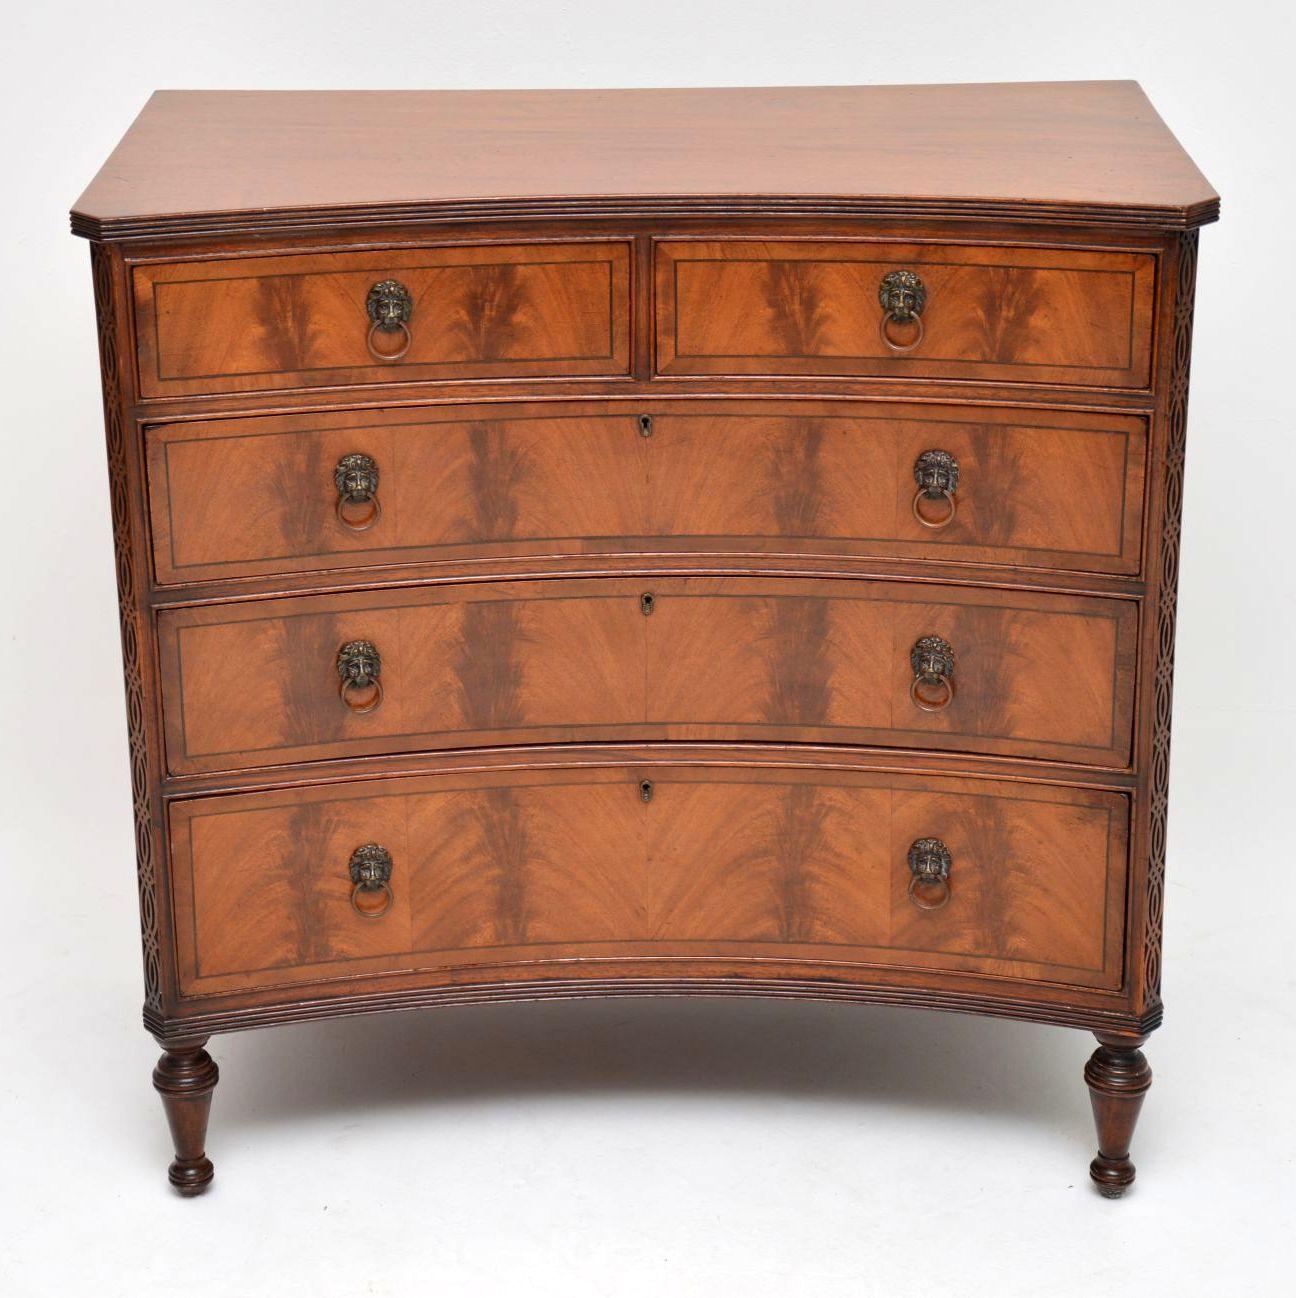 Fine quality antique mahogany chest of drawers with a concave front, in good condition & dating from circa 1910s-1920s period. Besides the concave front, it has many other lovely features. It has reeded top and bottom edge, while the front corners